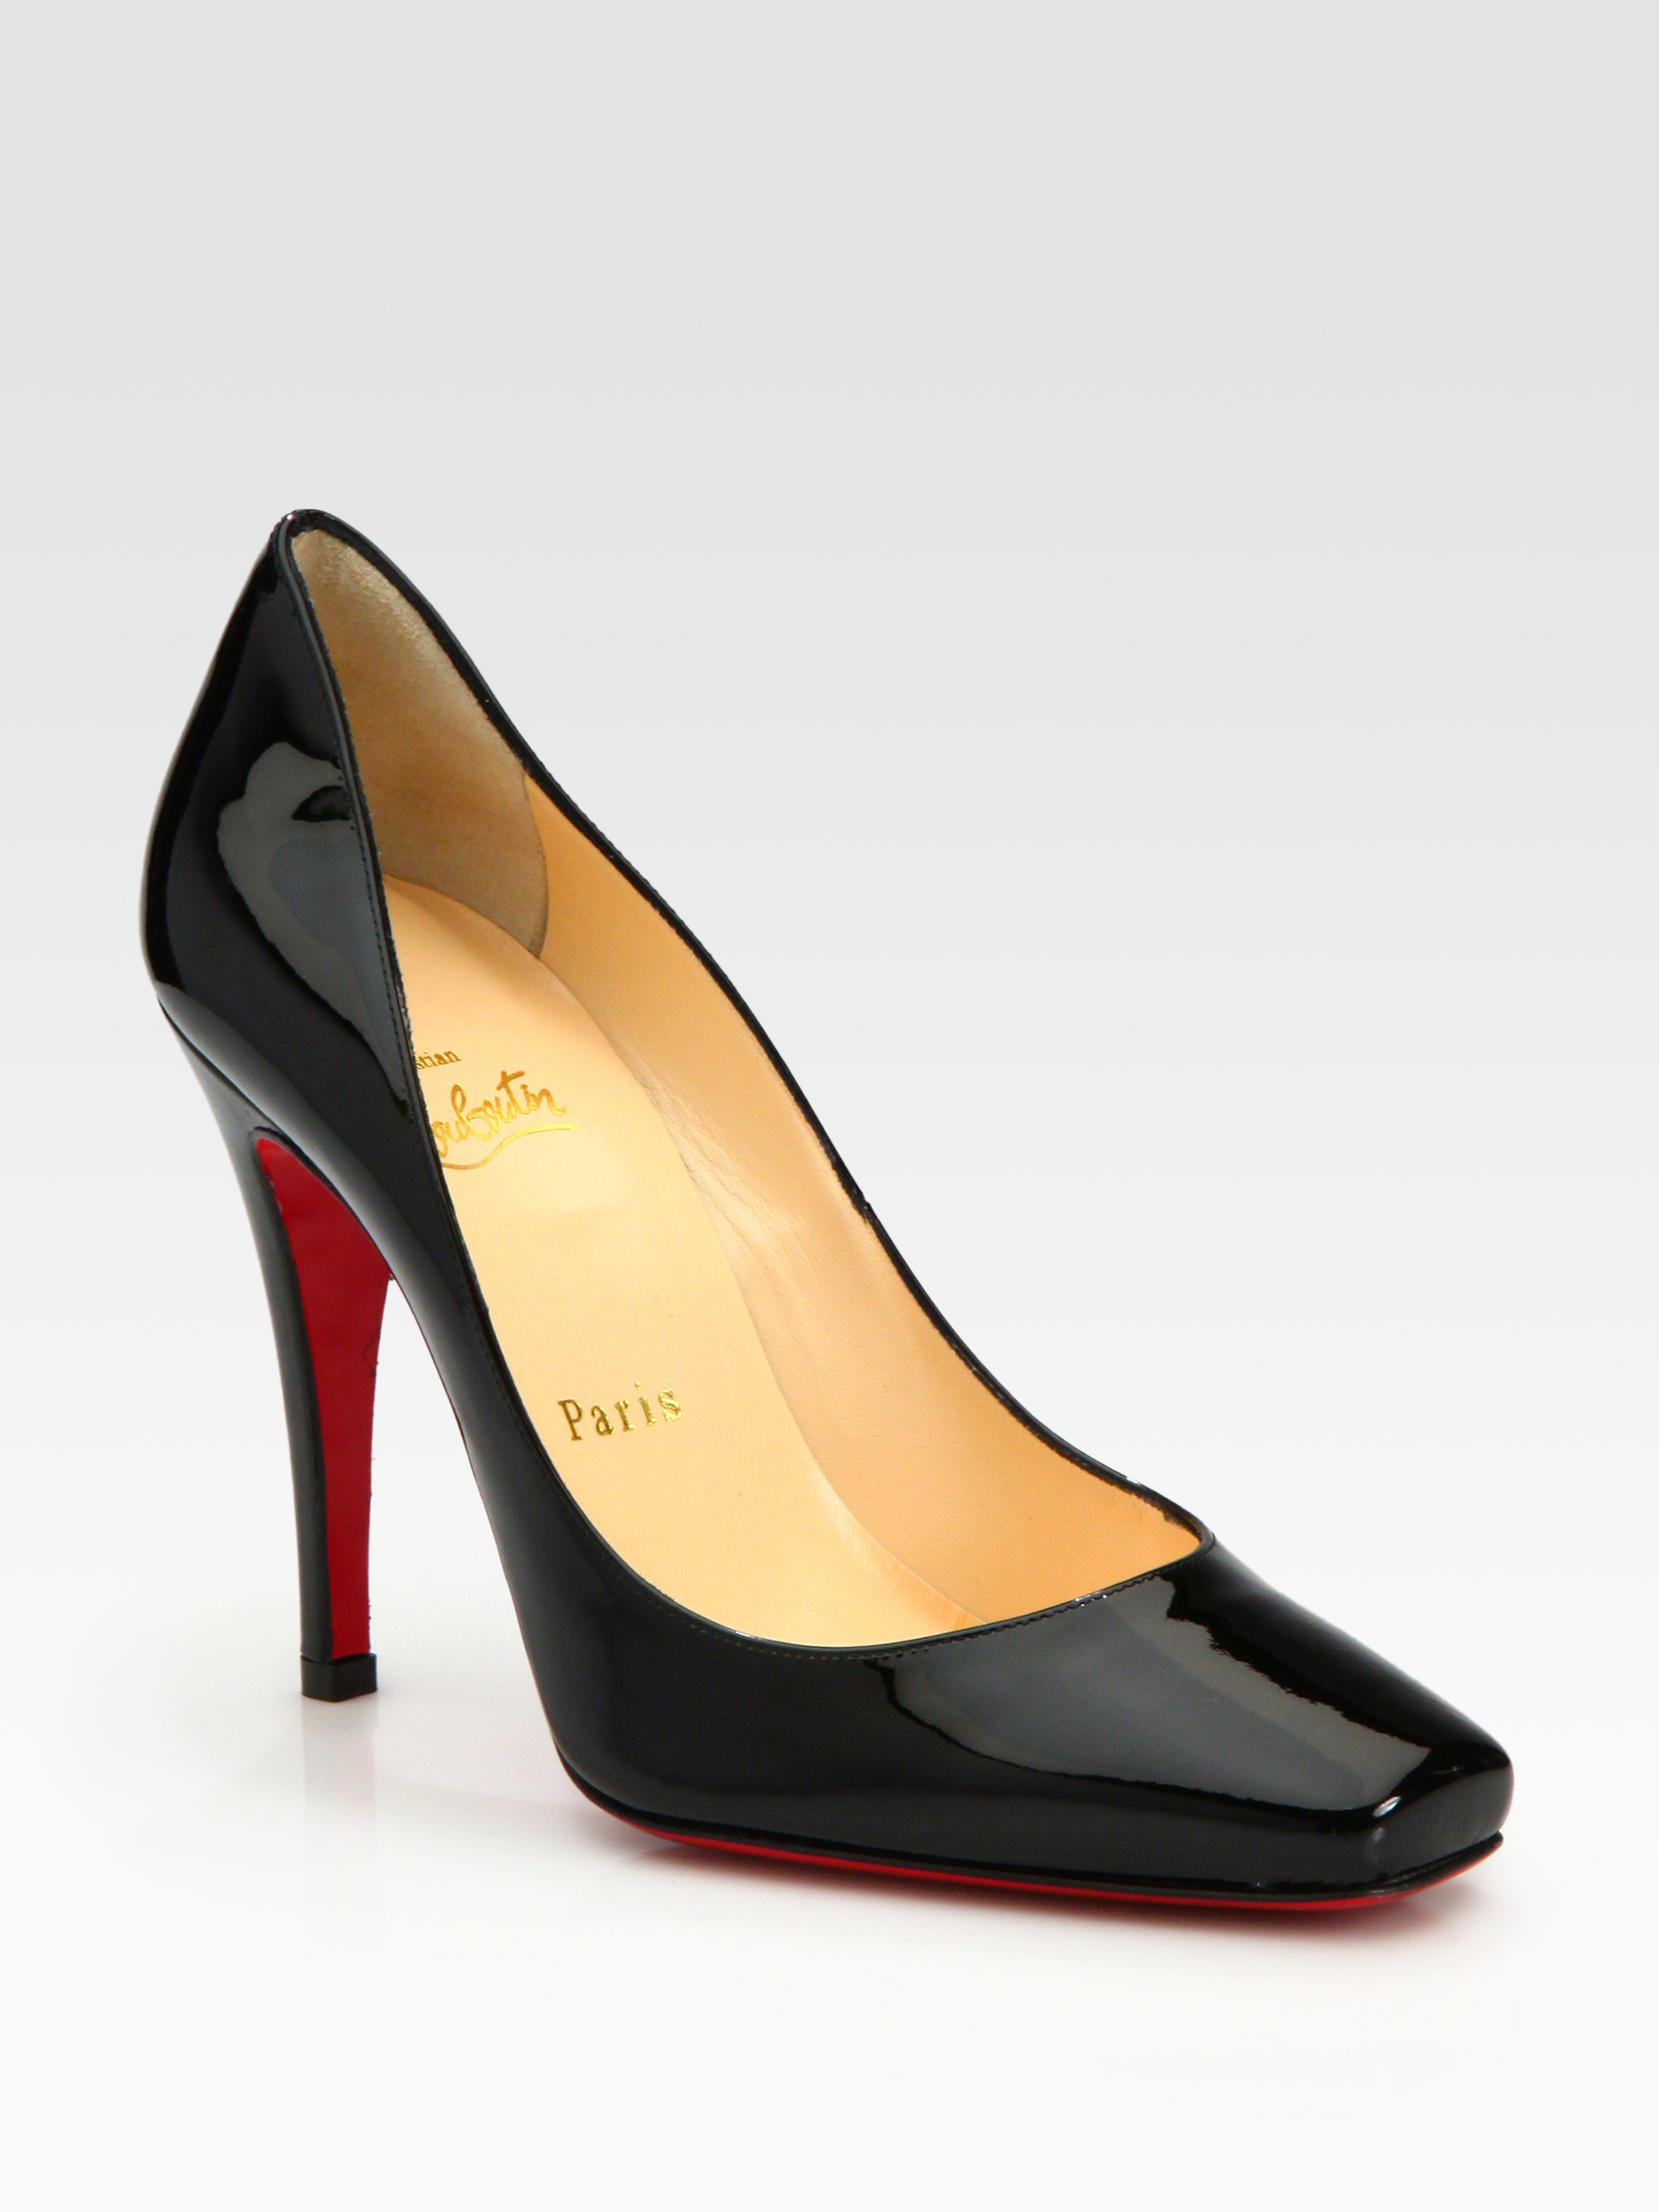 Christian Louboutin Particule Patent Leather Pumps In Black Lyst